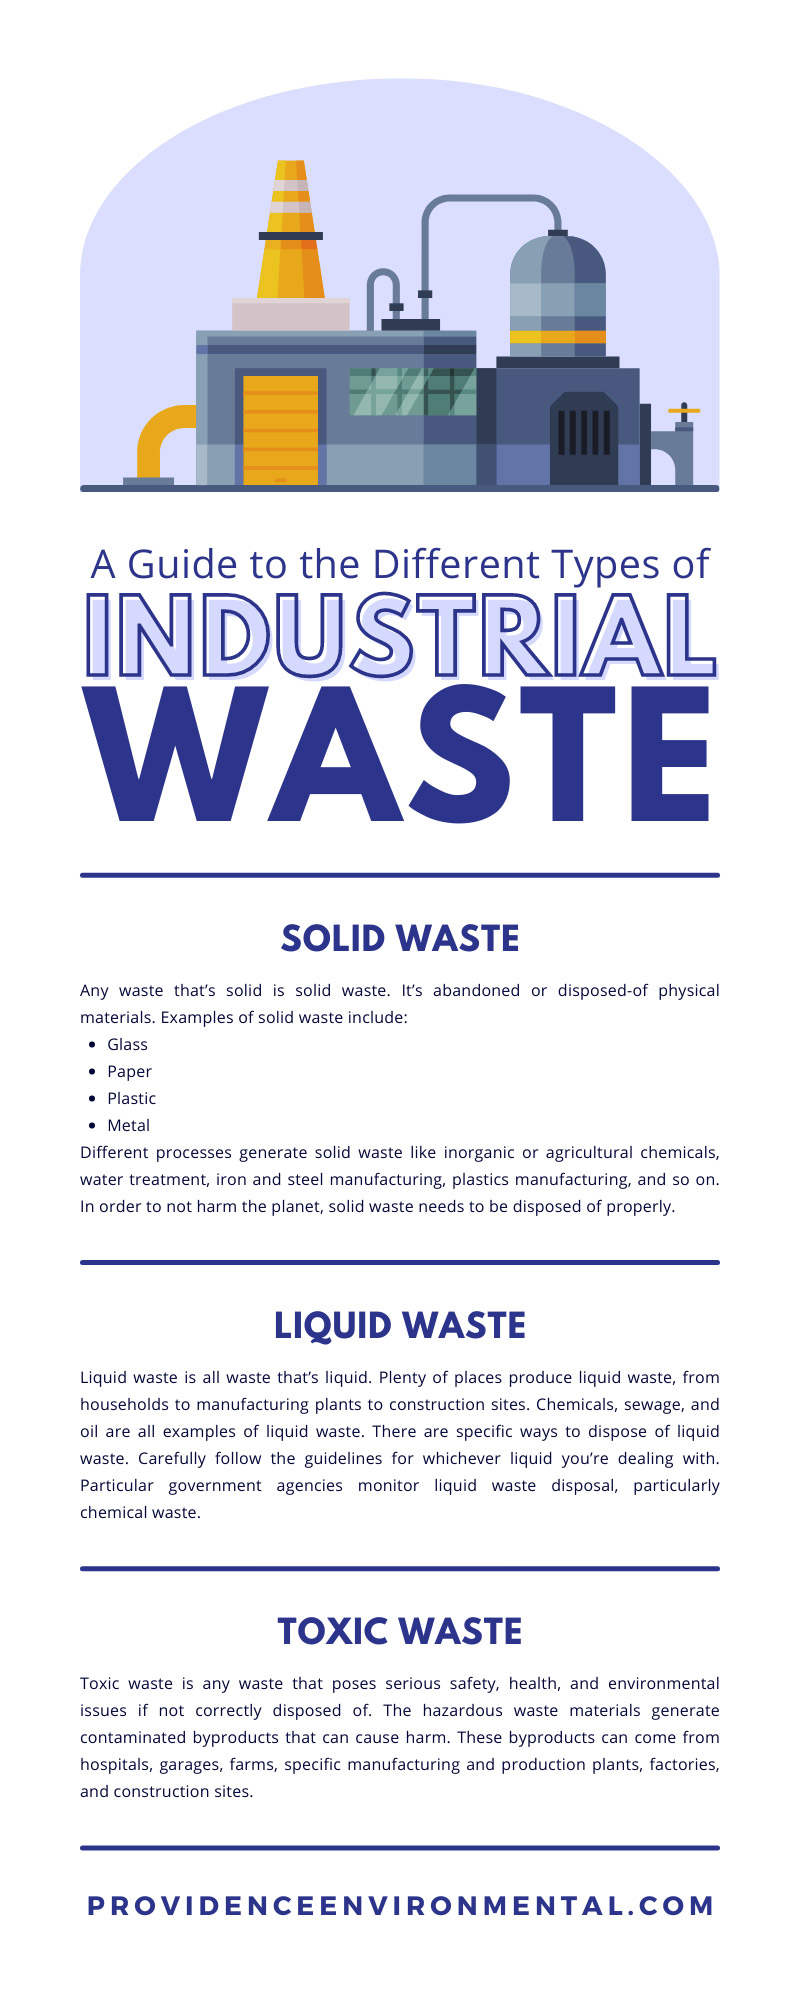 A Guide to the Different Types of Industrial Waste